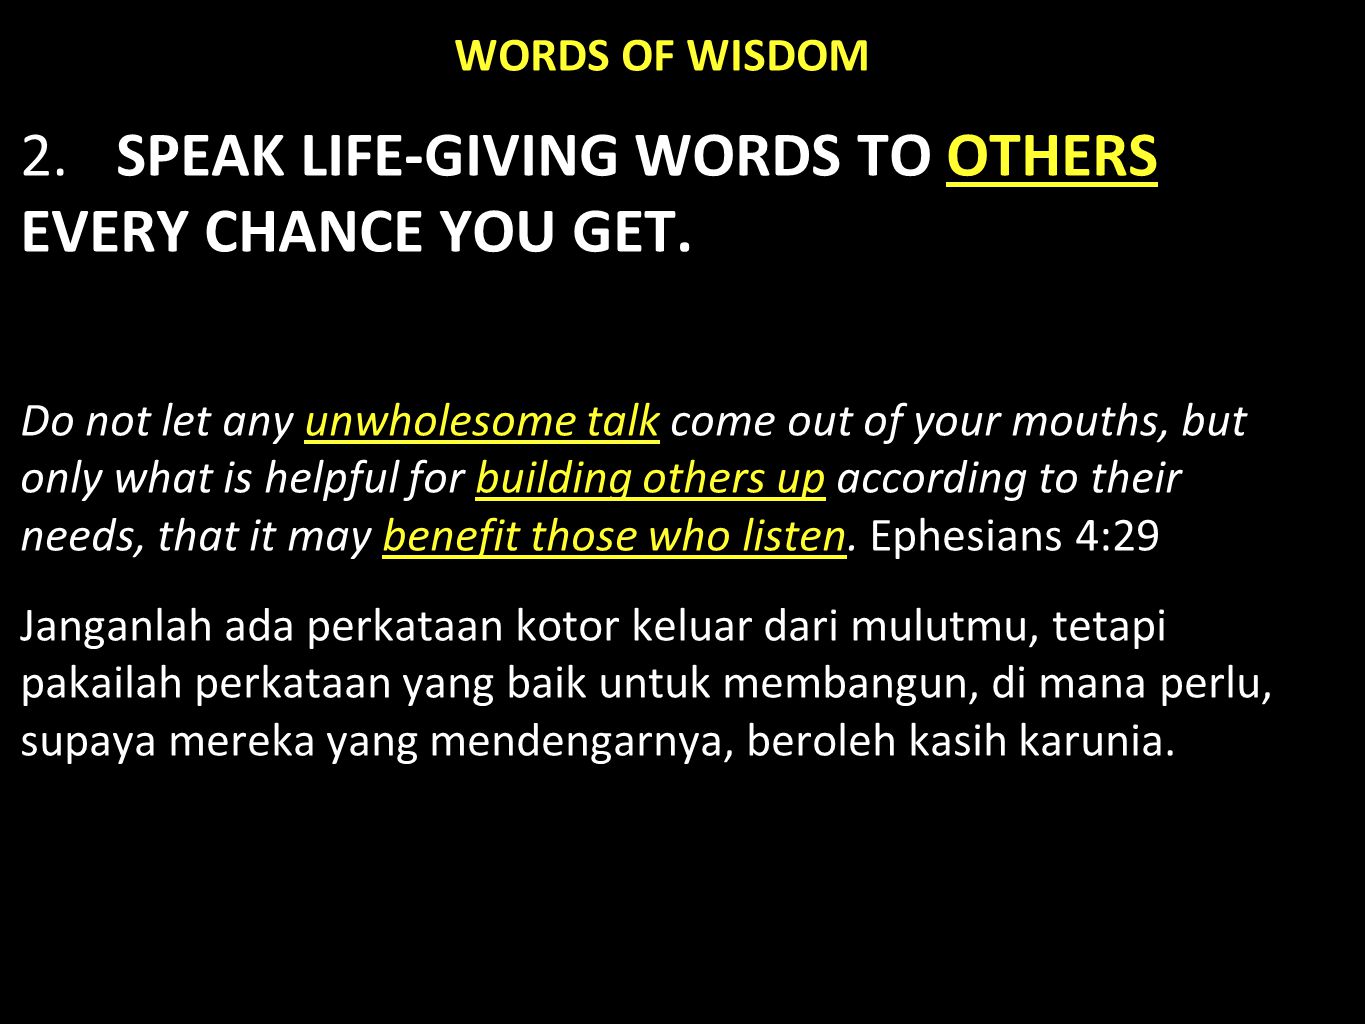 WORDS OF WISDOM 2. SPEAK LIFE-GIVING WORDS TO OTHERS EVERY CHANCE YOU GET.